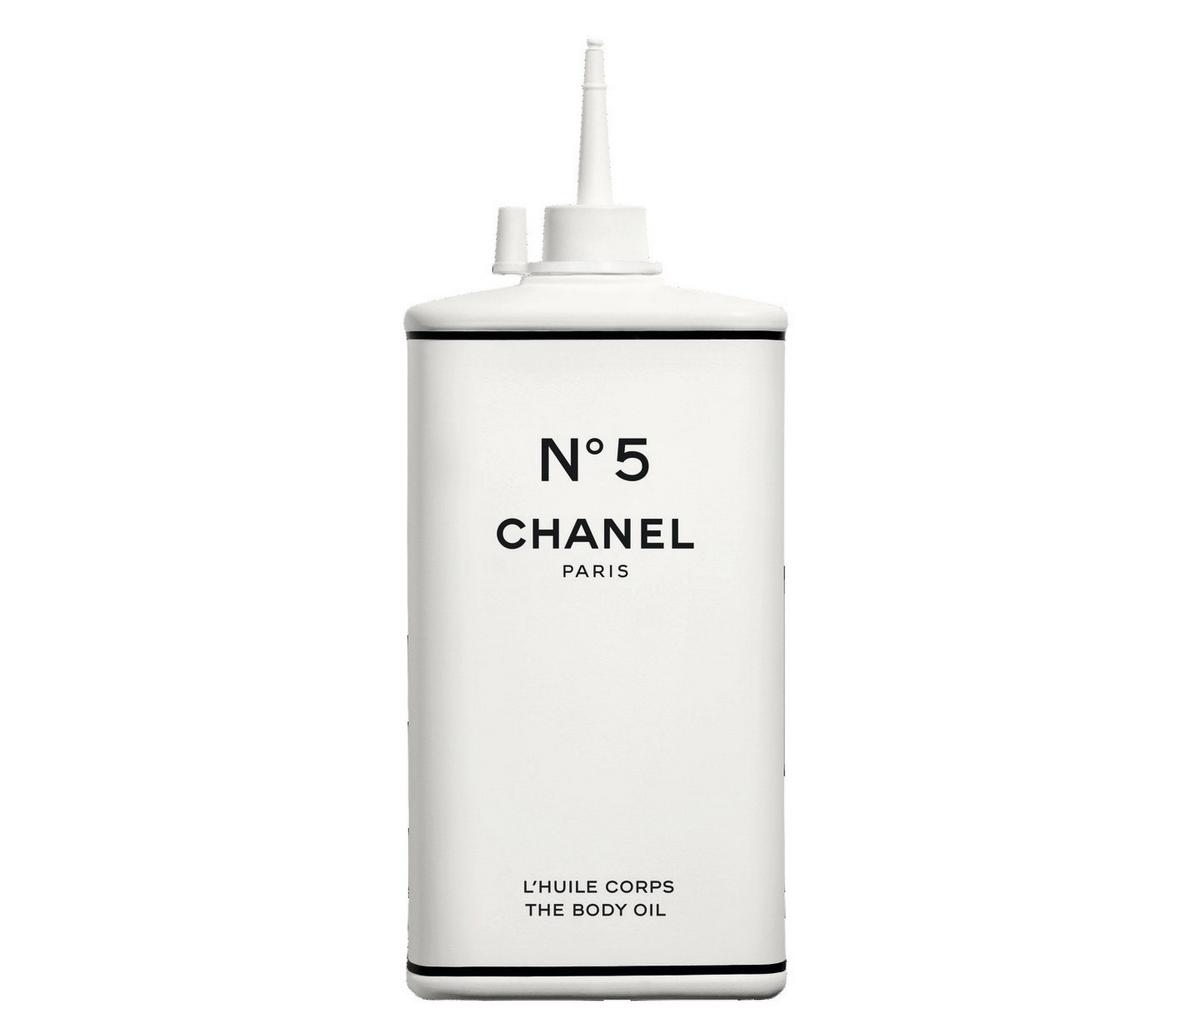 Chanel launches Factory 5 collection and popups for N5 centenary